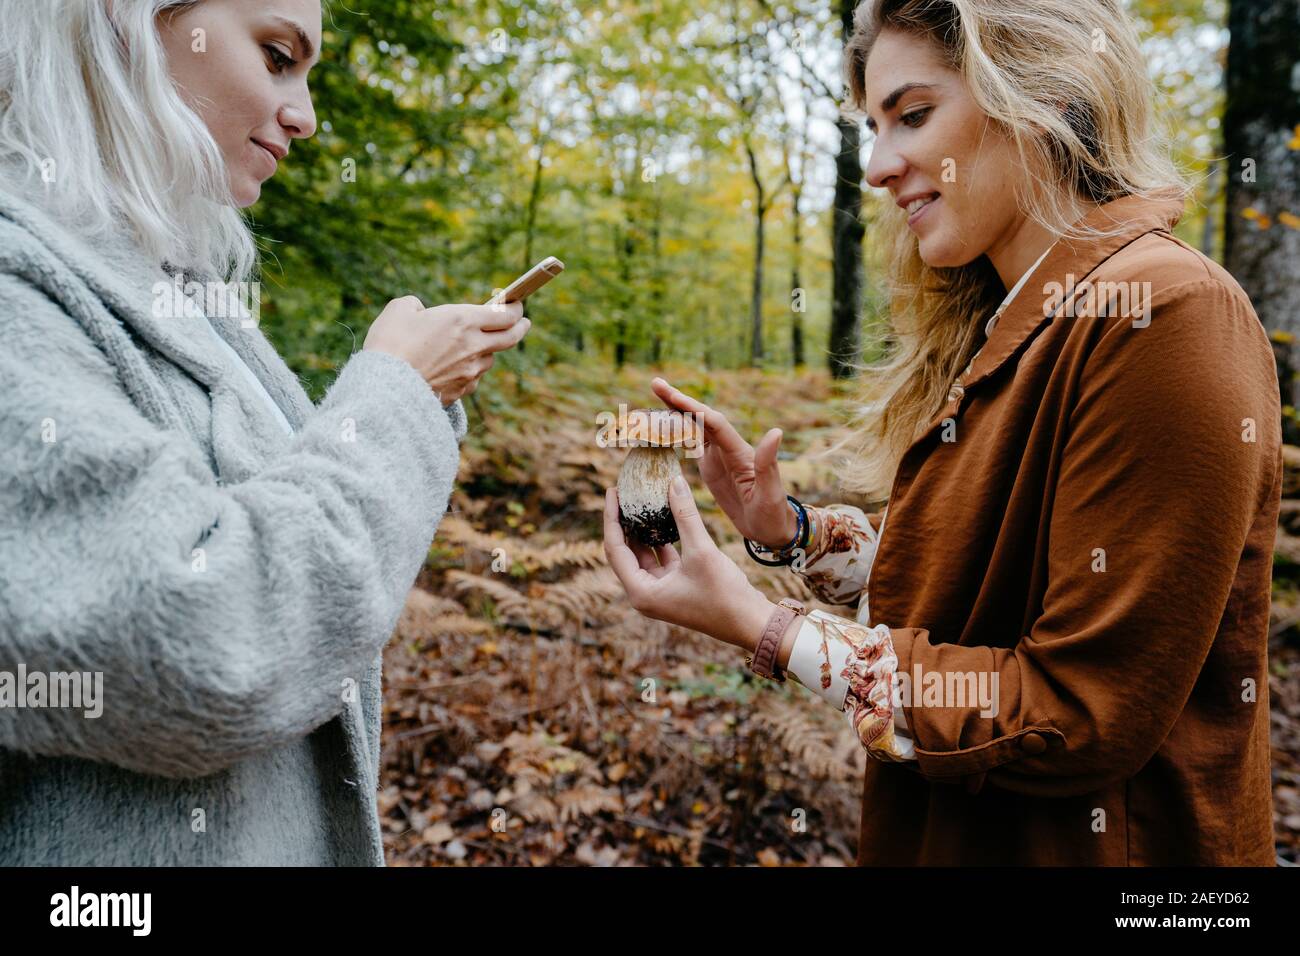 Women taking pictures of mushroom in a forest with a phone Stock Photo